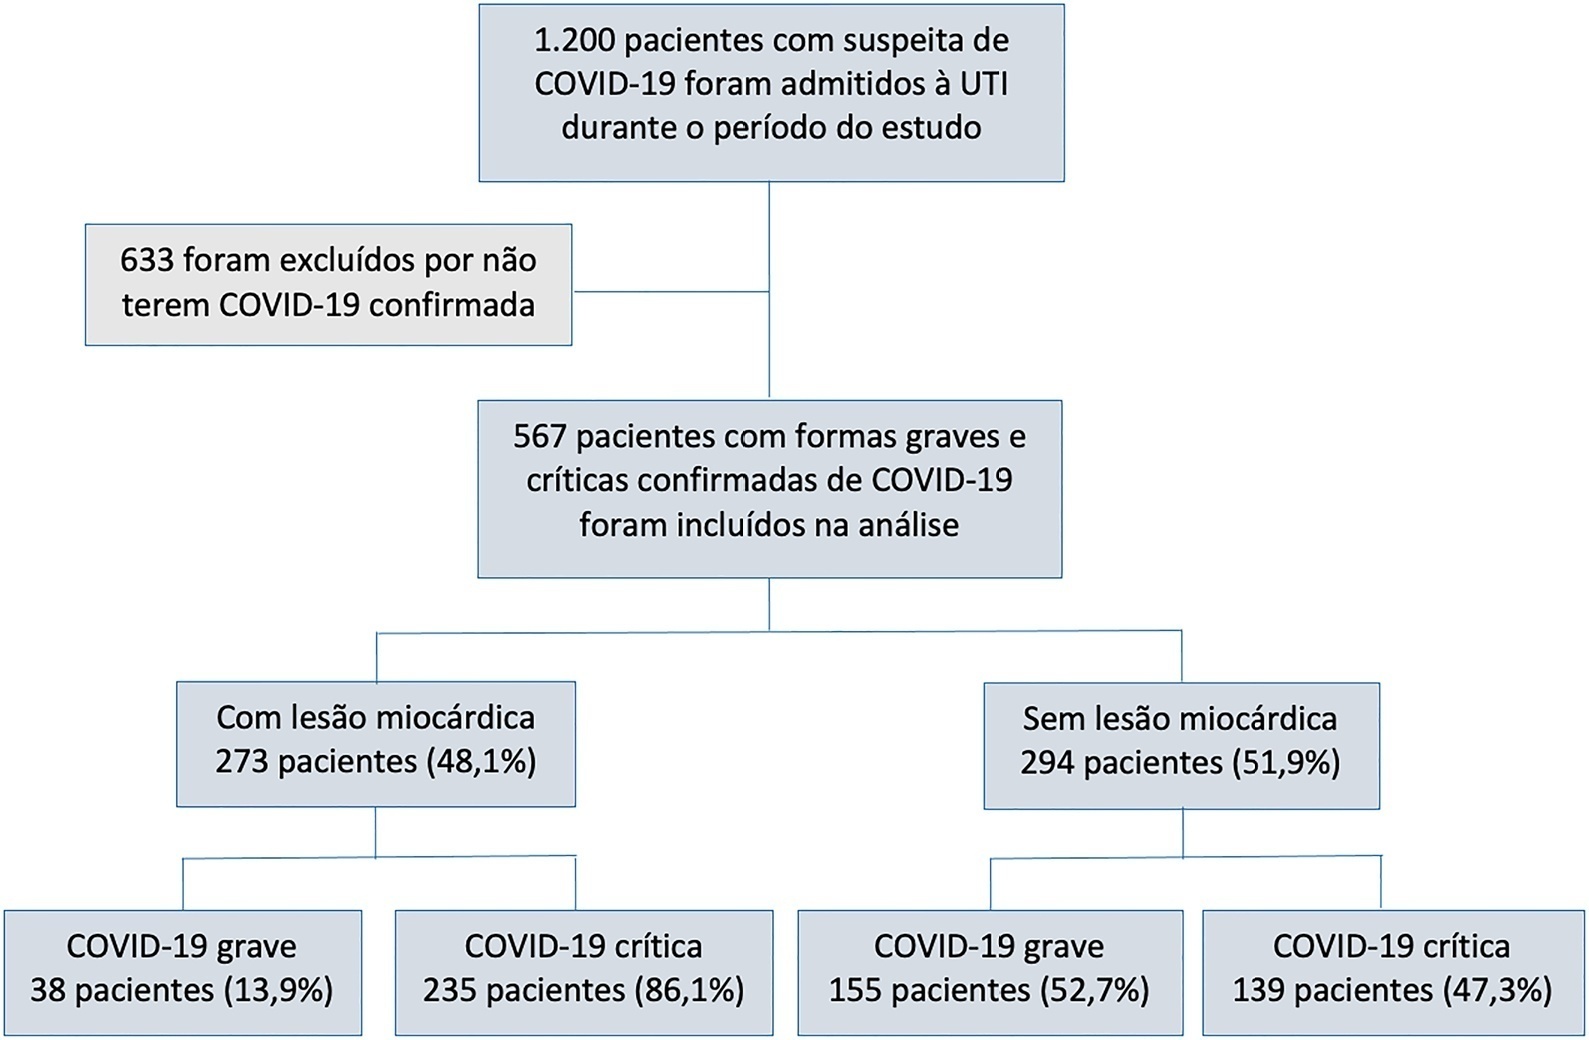 Myocardial injury and cardiovascular complications in COVID-19: a cohort study in severe and critical patients